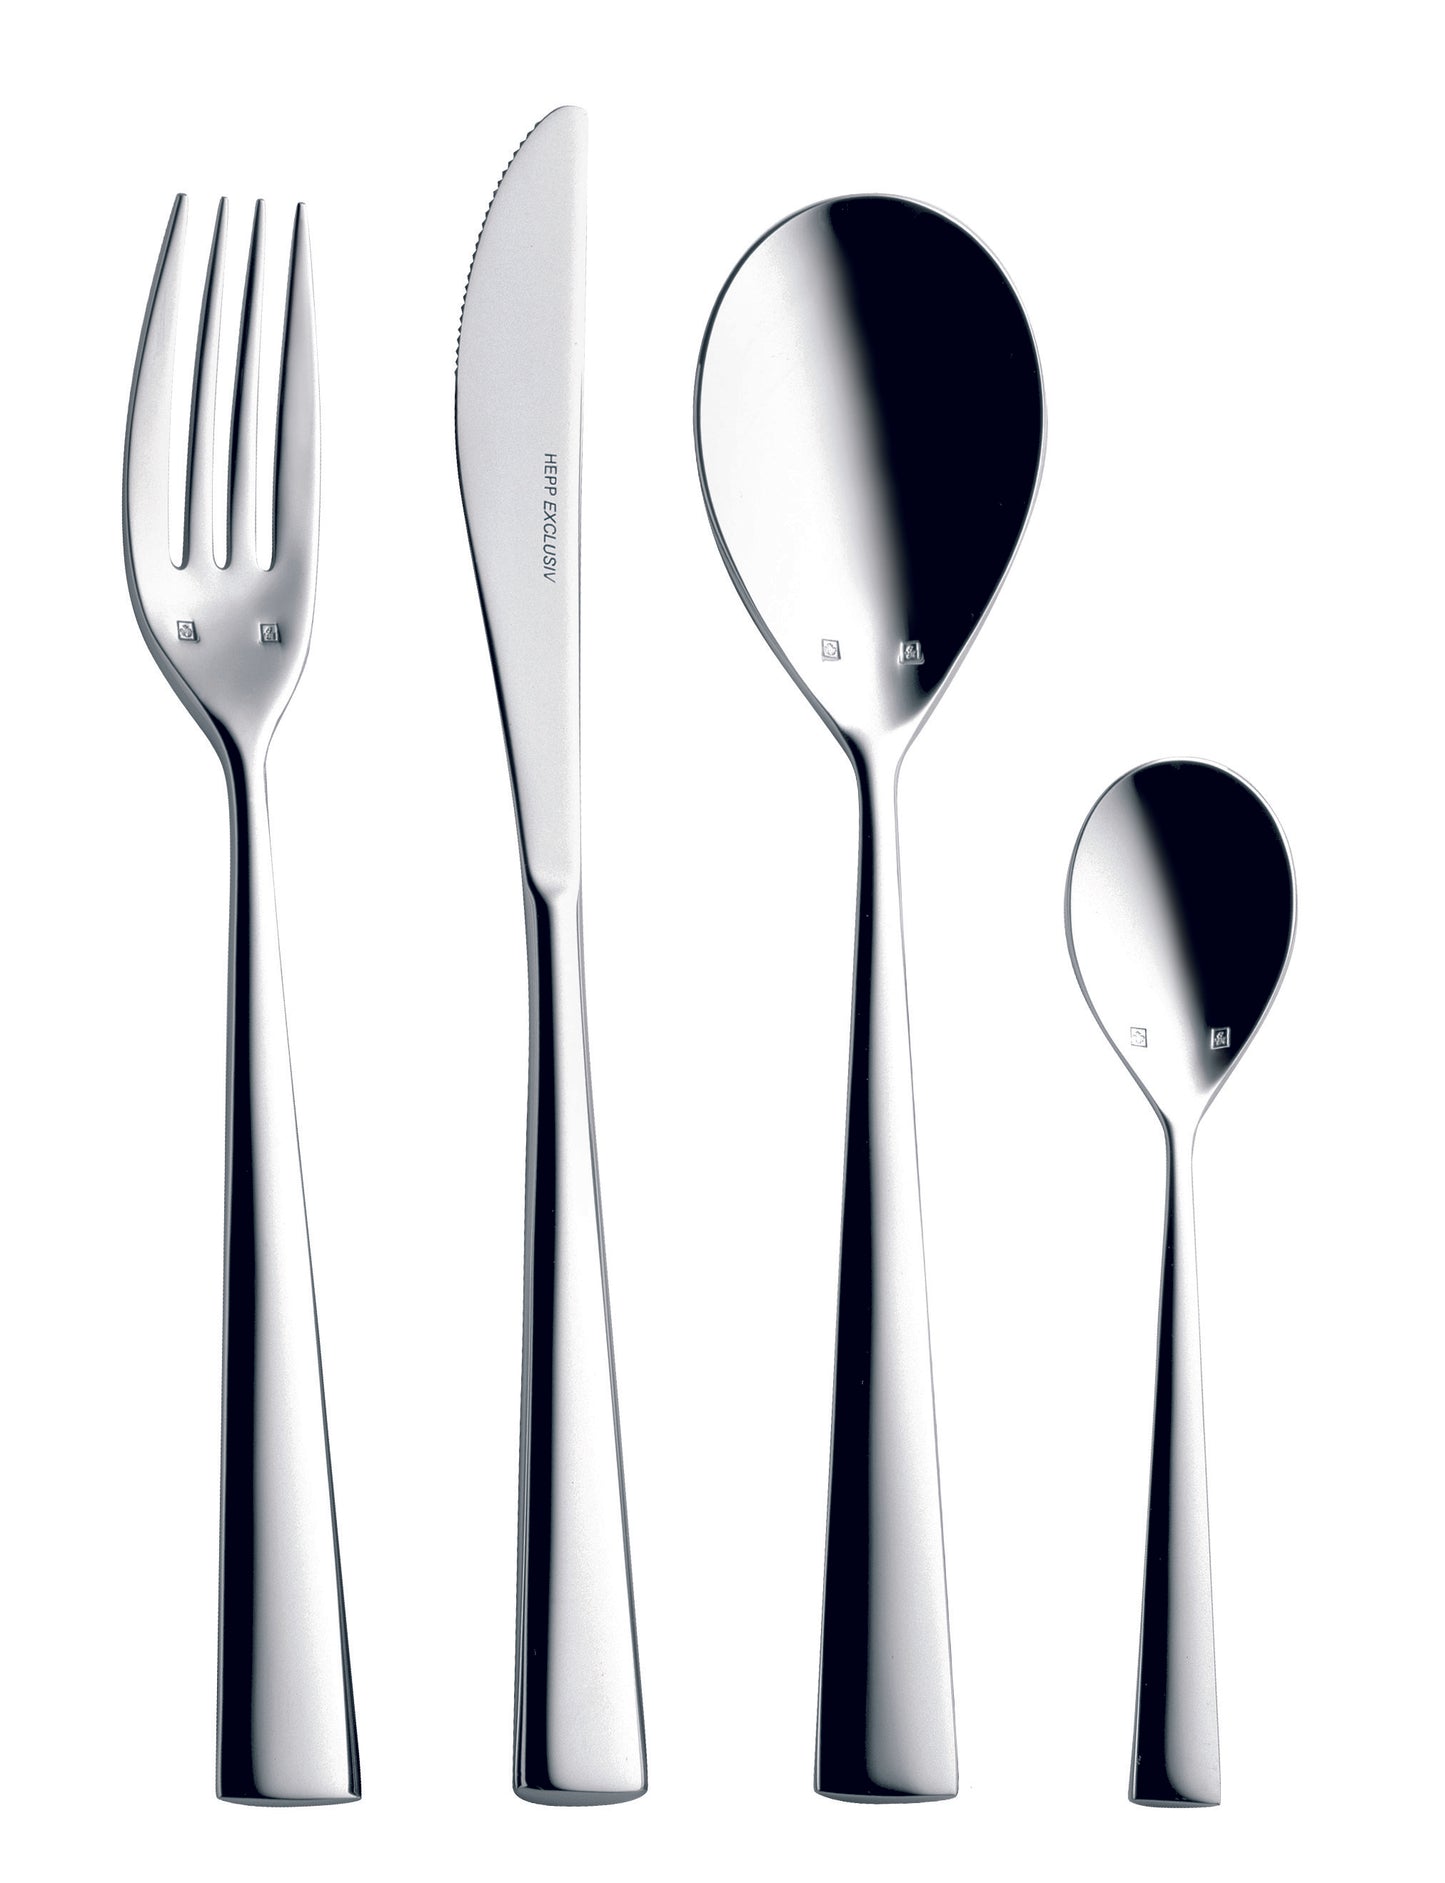 Fish fork ACCENT silver plated 179mm